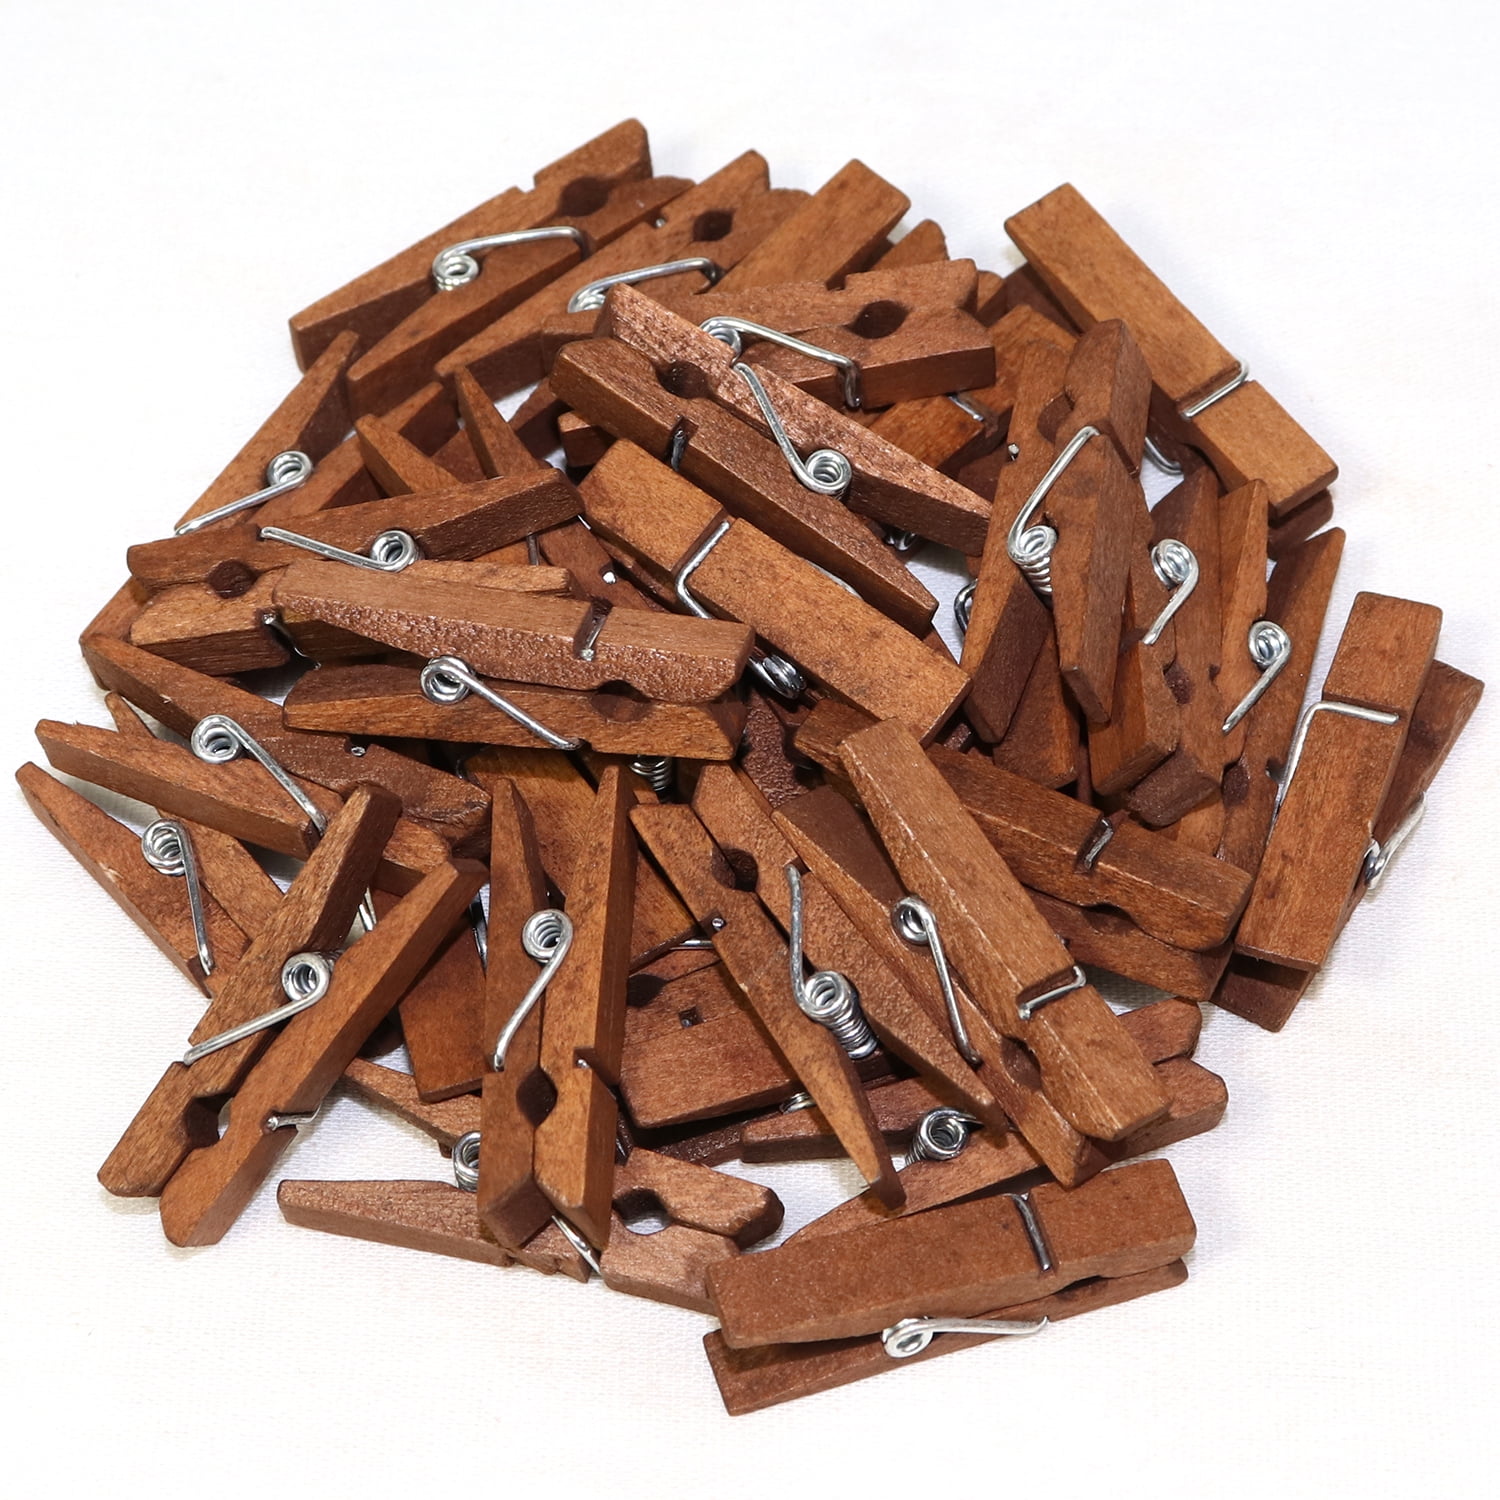 50pcs Natural Wooden Mini Clothespins for Holding Photo Paper, Dorman &  Walsh Mini Pegs for Decorative Photo Wall, DIY Decoration's, Tiny Wooden Clothes  Pegs, for Arts & Crafts, Weddings, Cocktails 